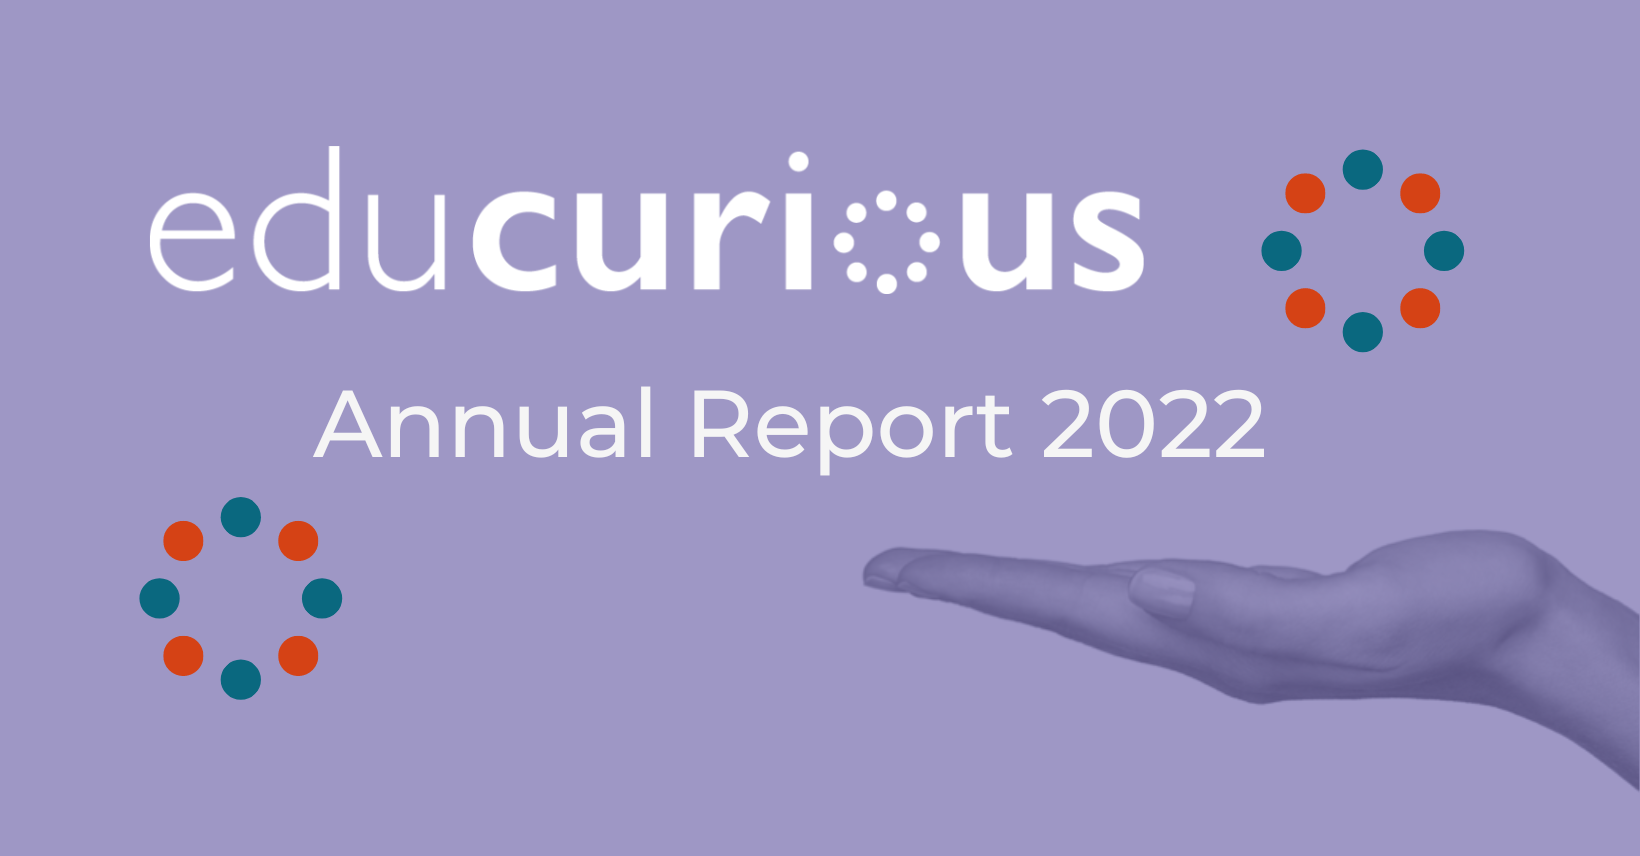 annual report 2022 education